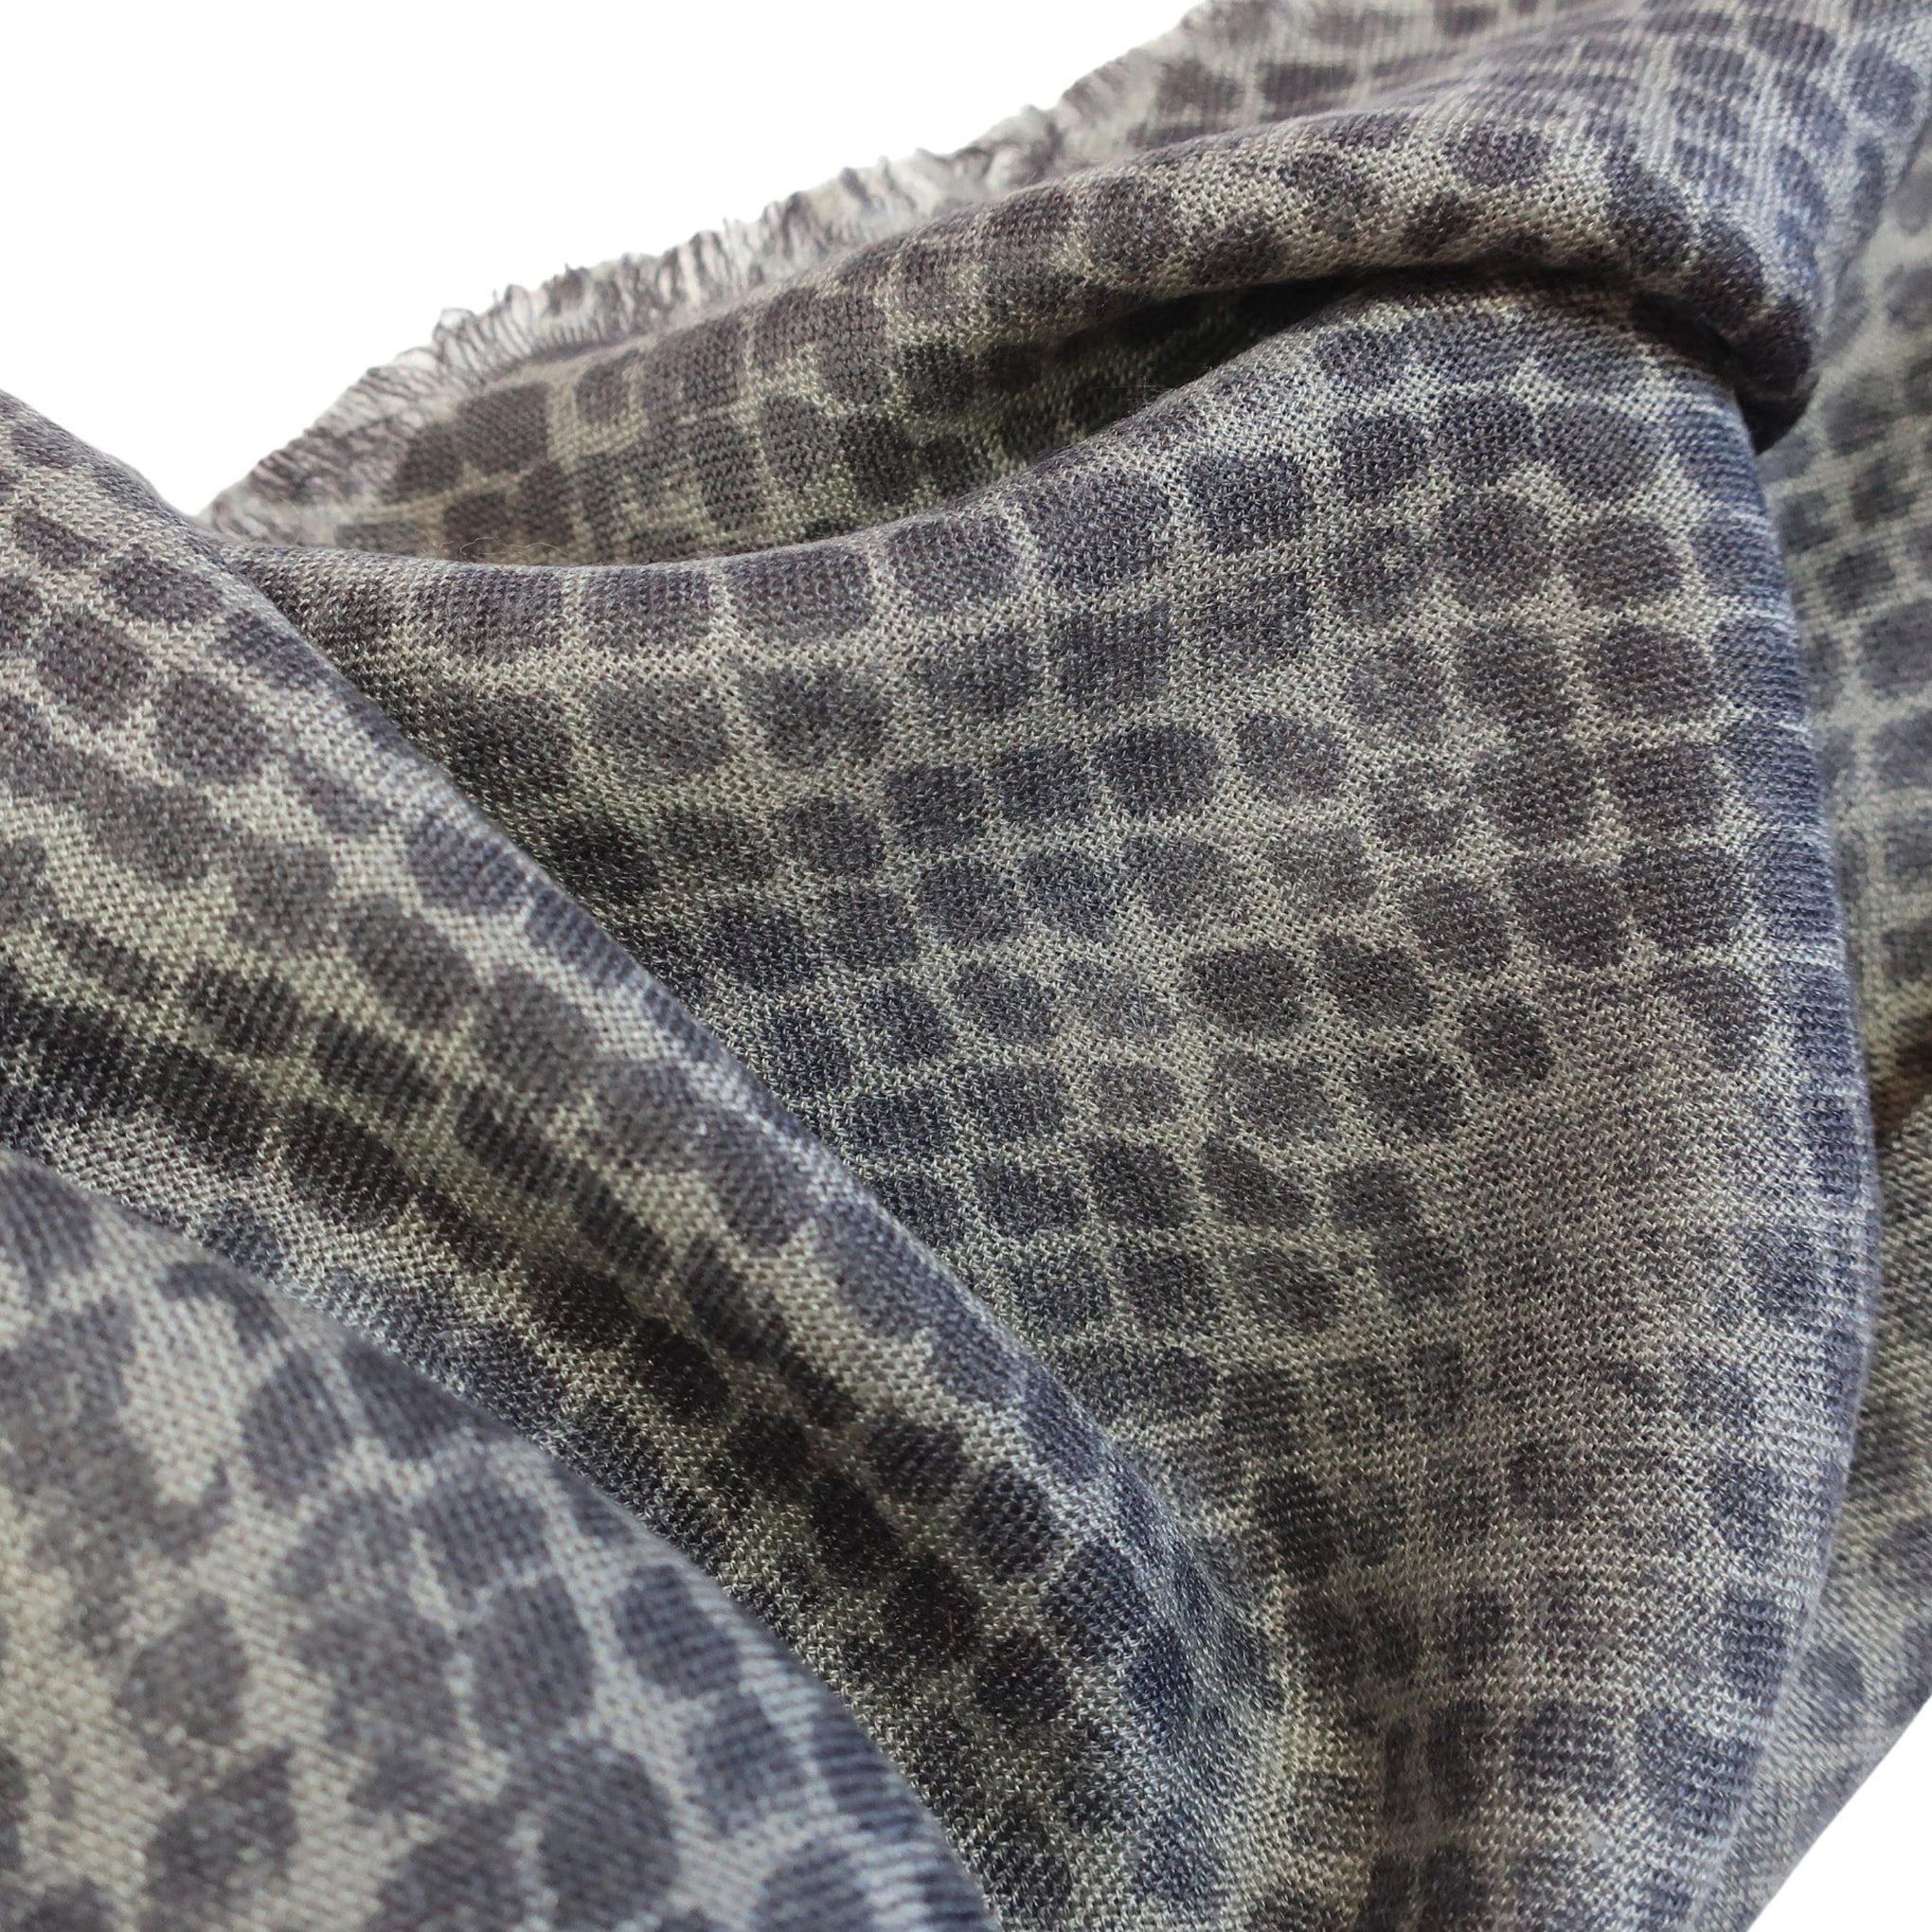 Blue Pacific Tissue Solid Modal and Cashmere Scarf Shawl in Snake Animal Print